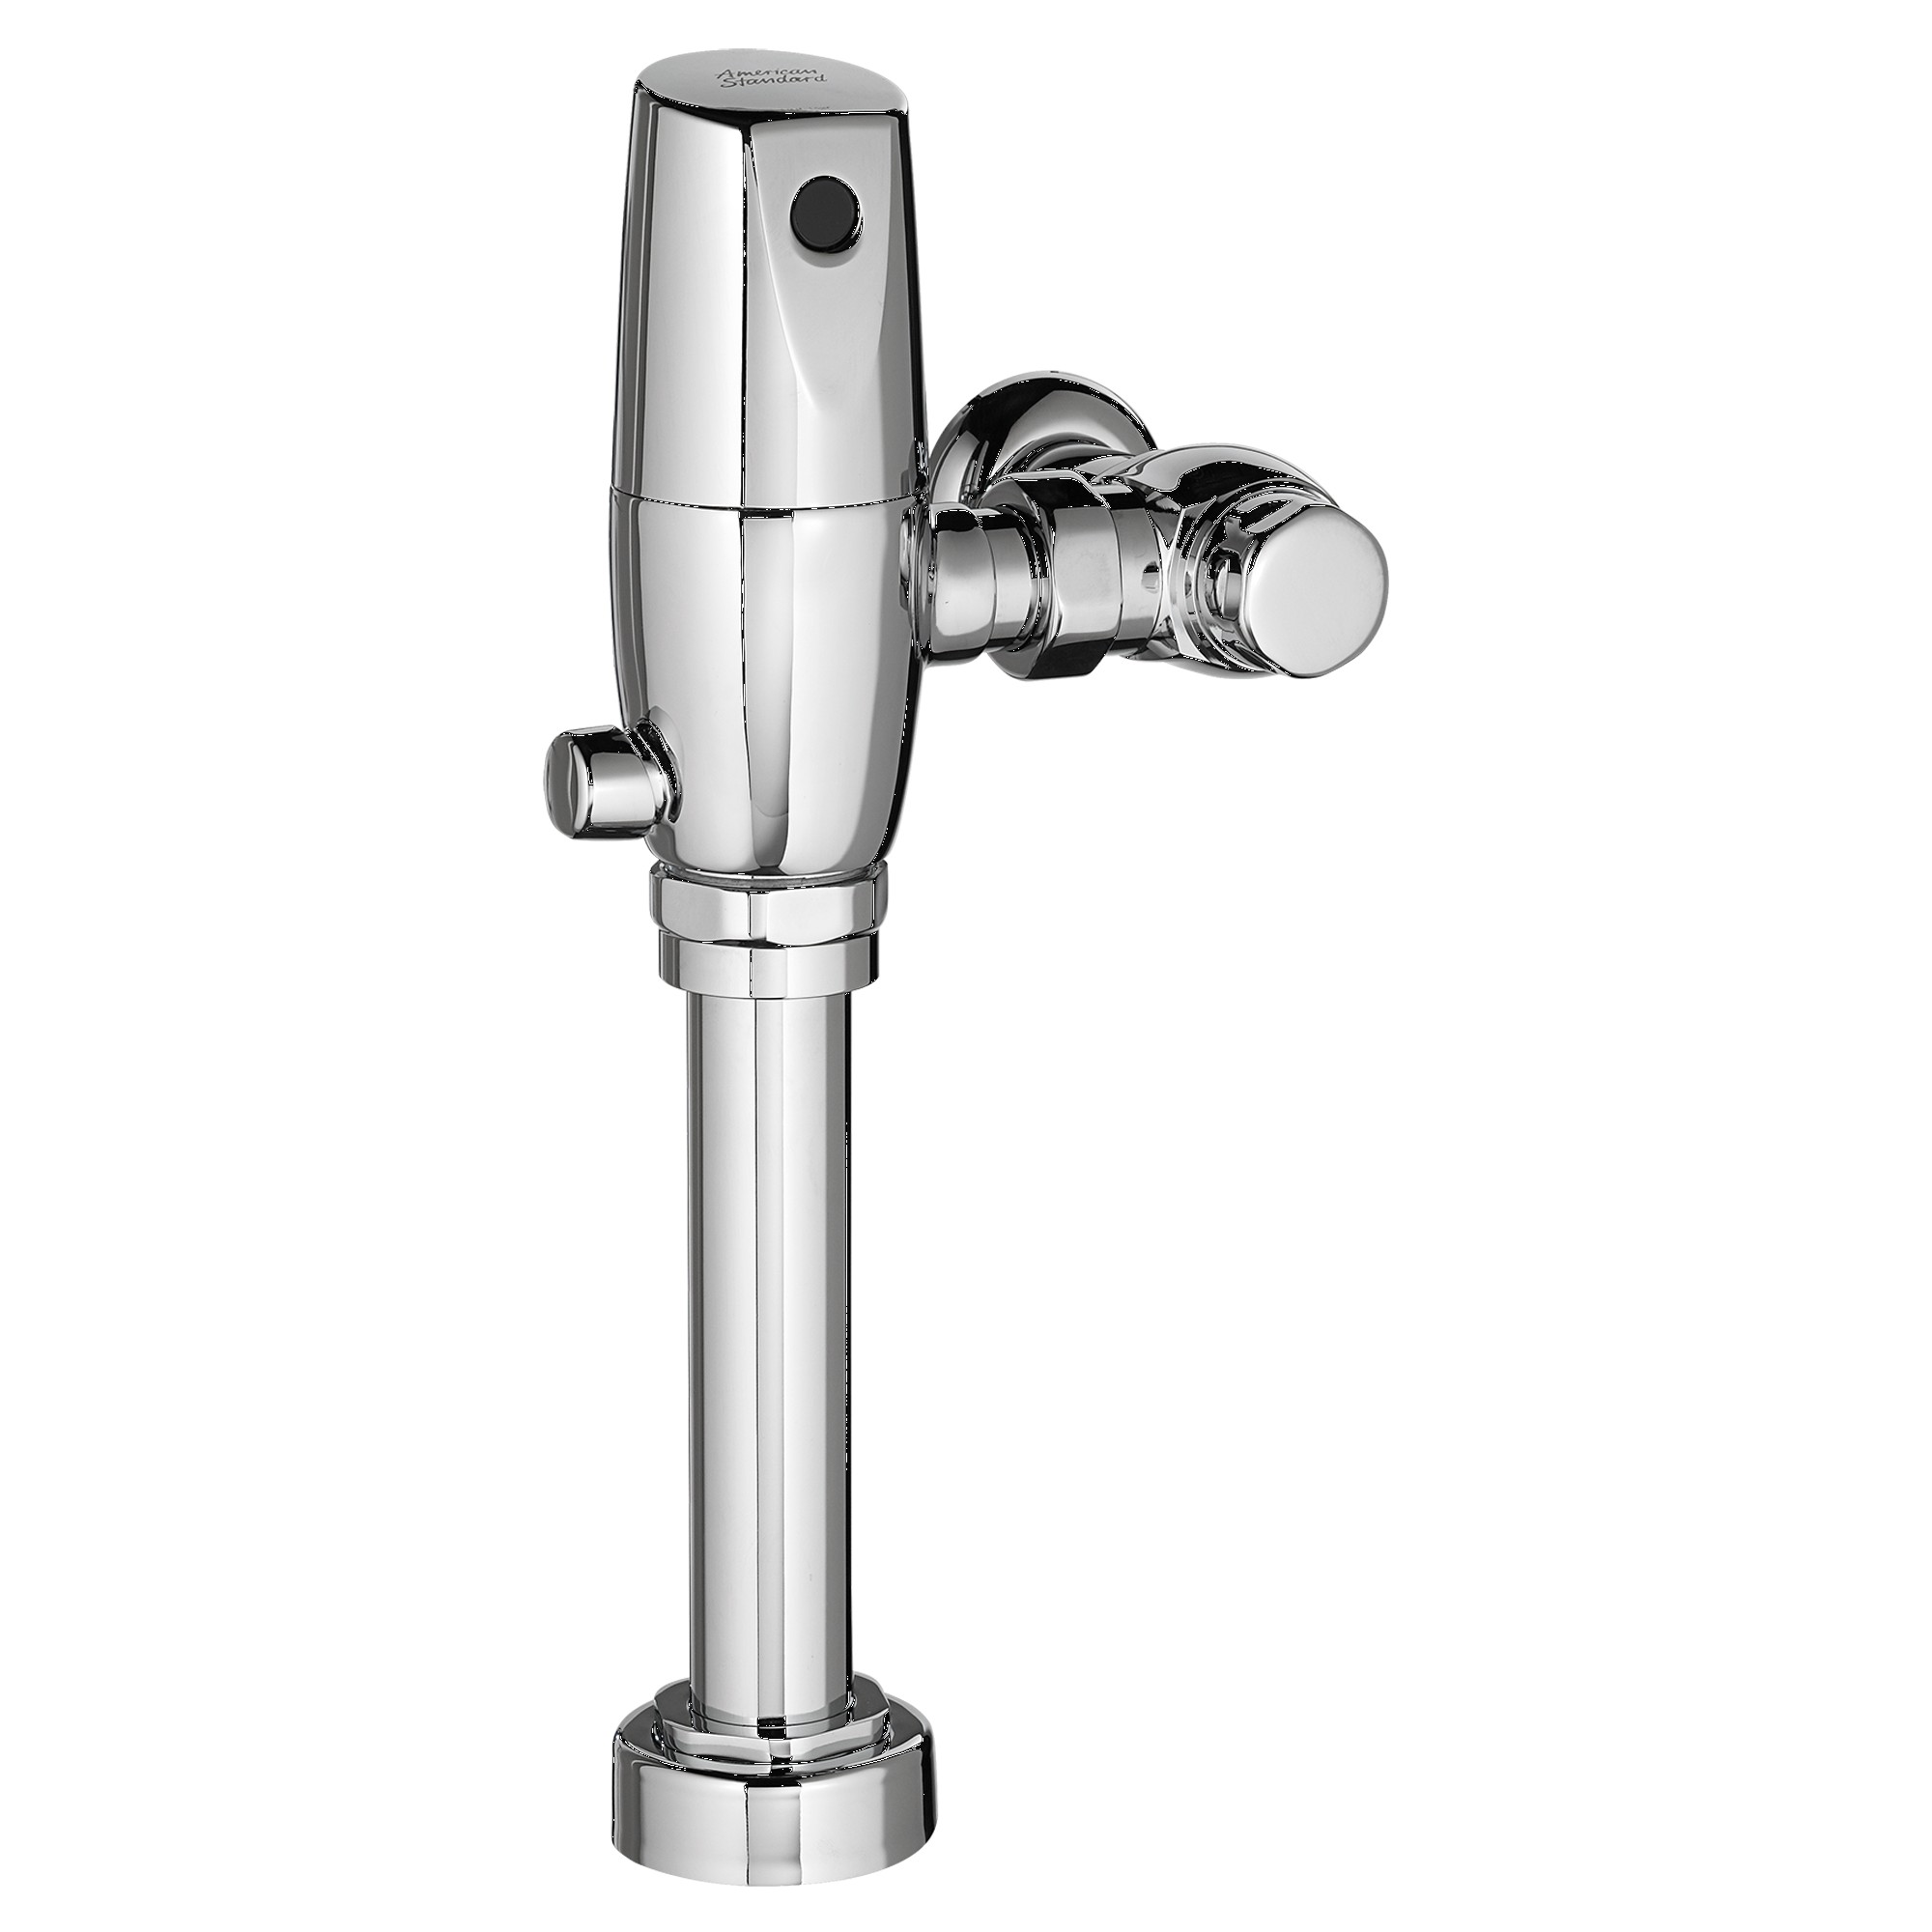 American Standard | 6065.161.002 | AMERICAN STANDARD 6065.161 DC SELECTRONIC TOP SPUD FLUSH VALVE FOR TOILET 1.6GPF CP 002 POLISHED CHROME 